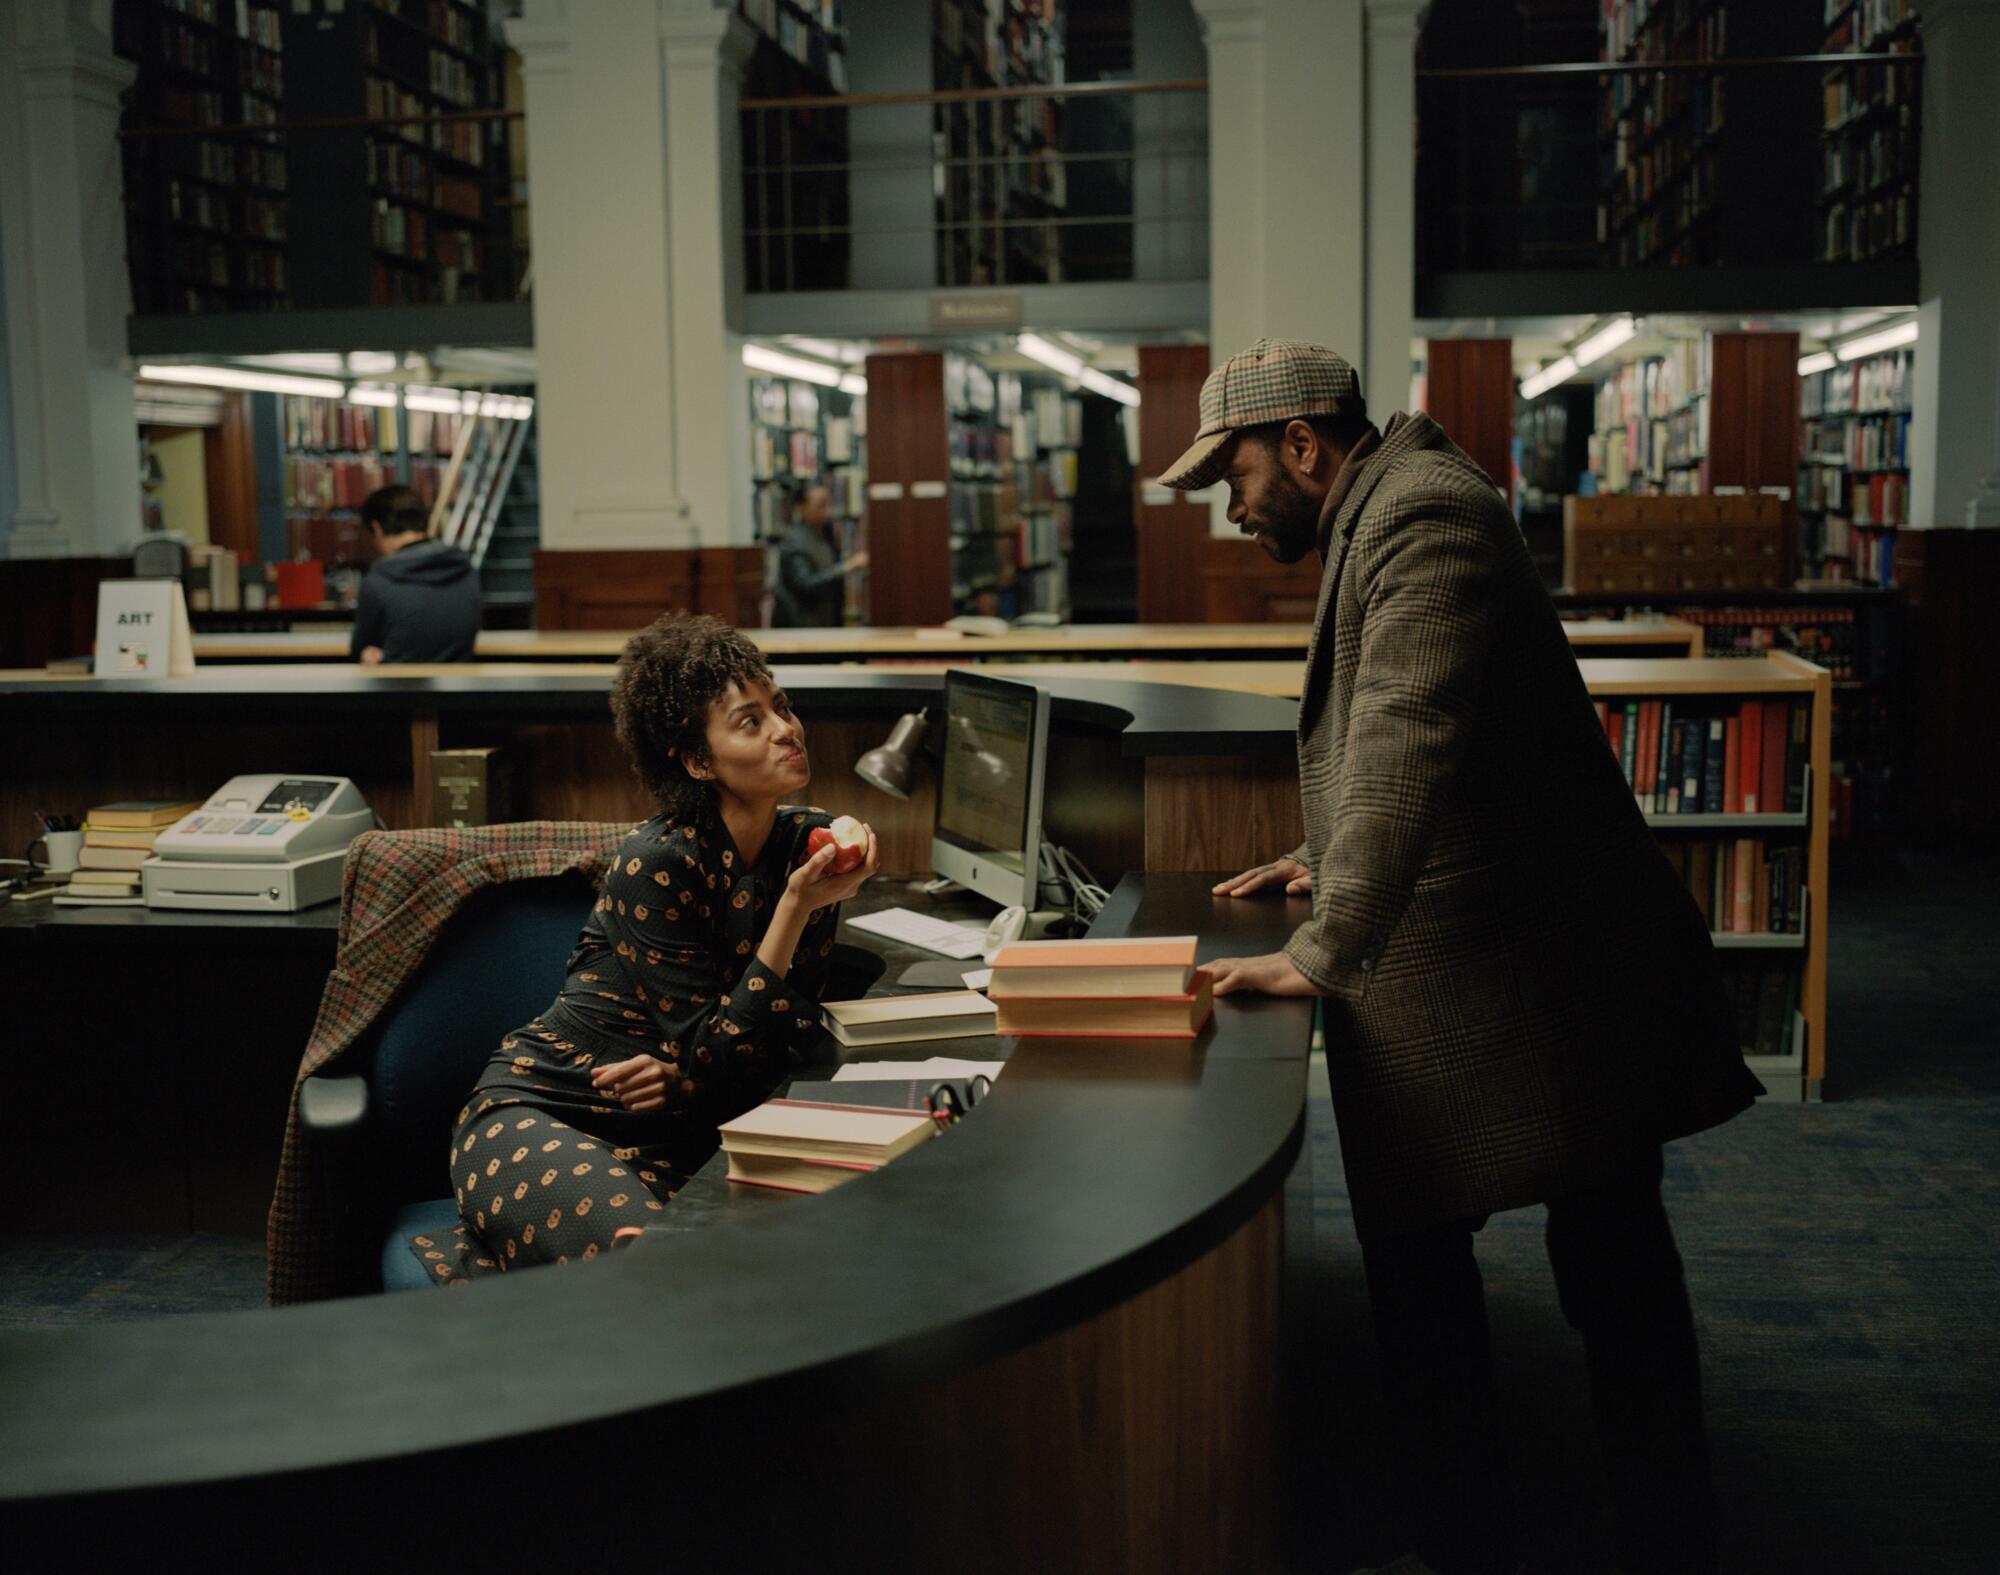 A librarian sits behind a counter holding an apple while a man stands on the other side speaking to her.